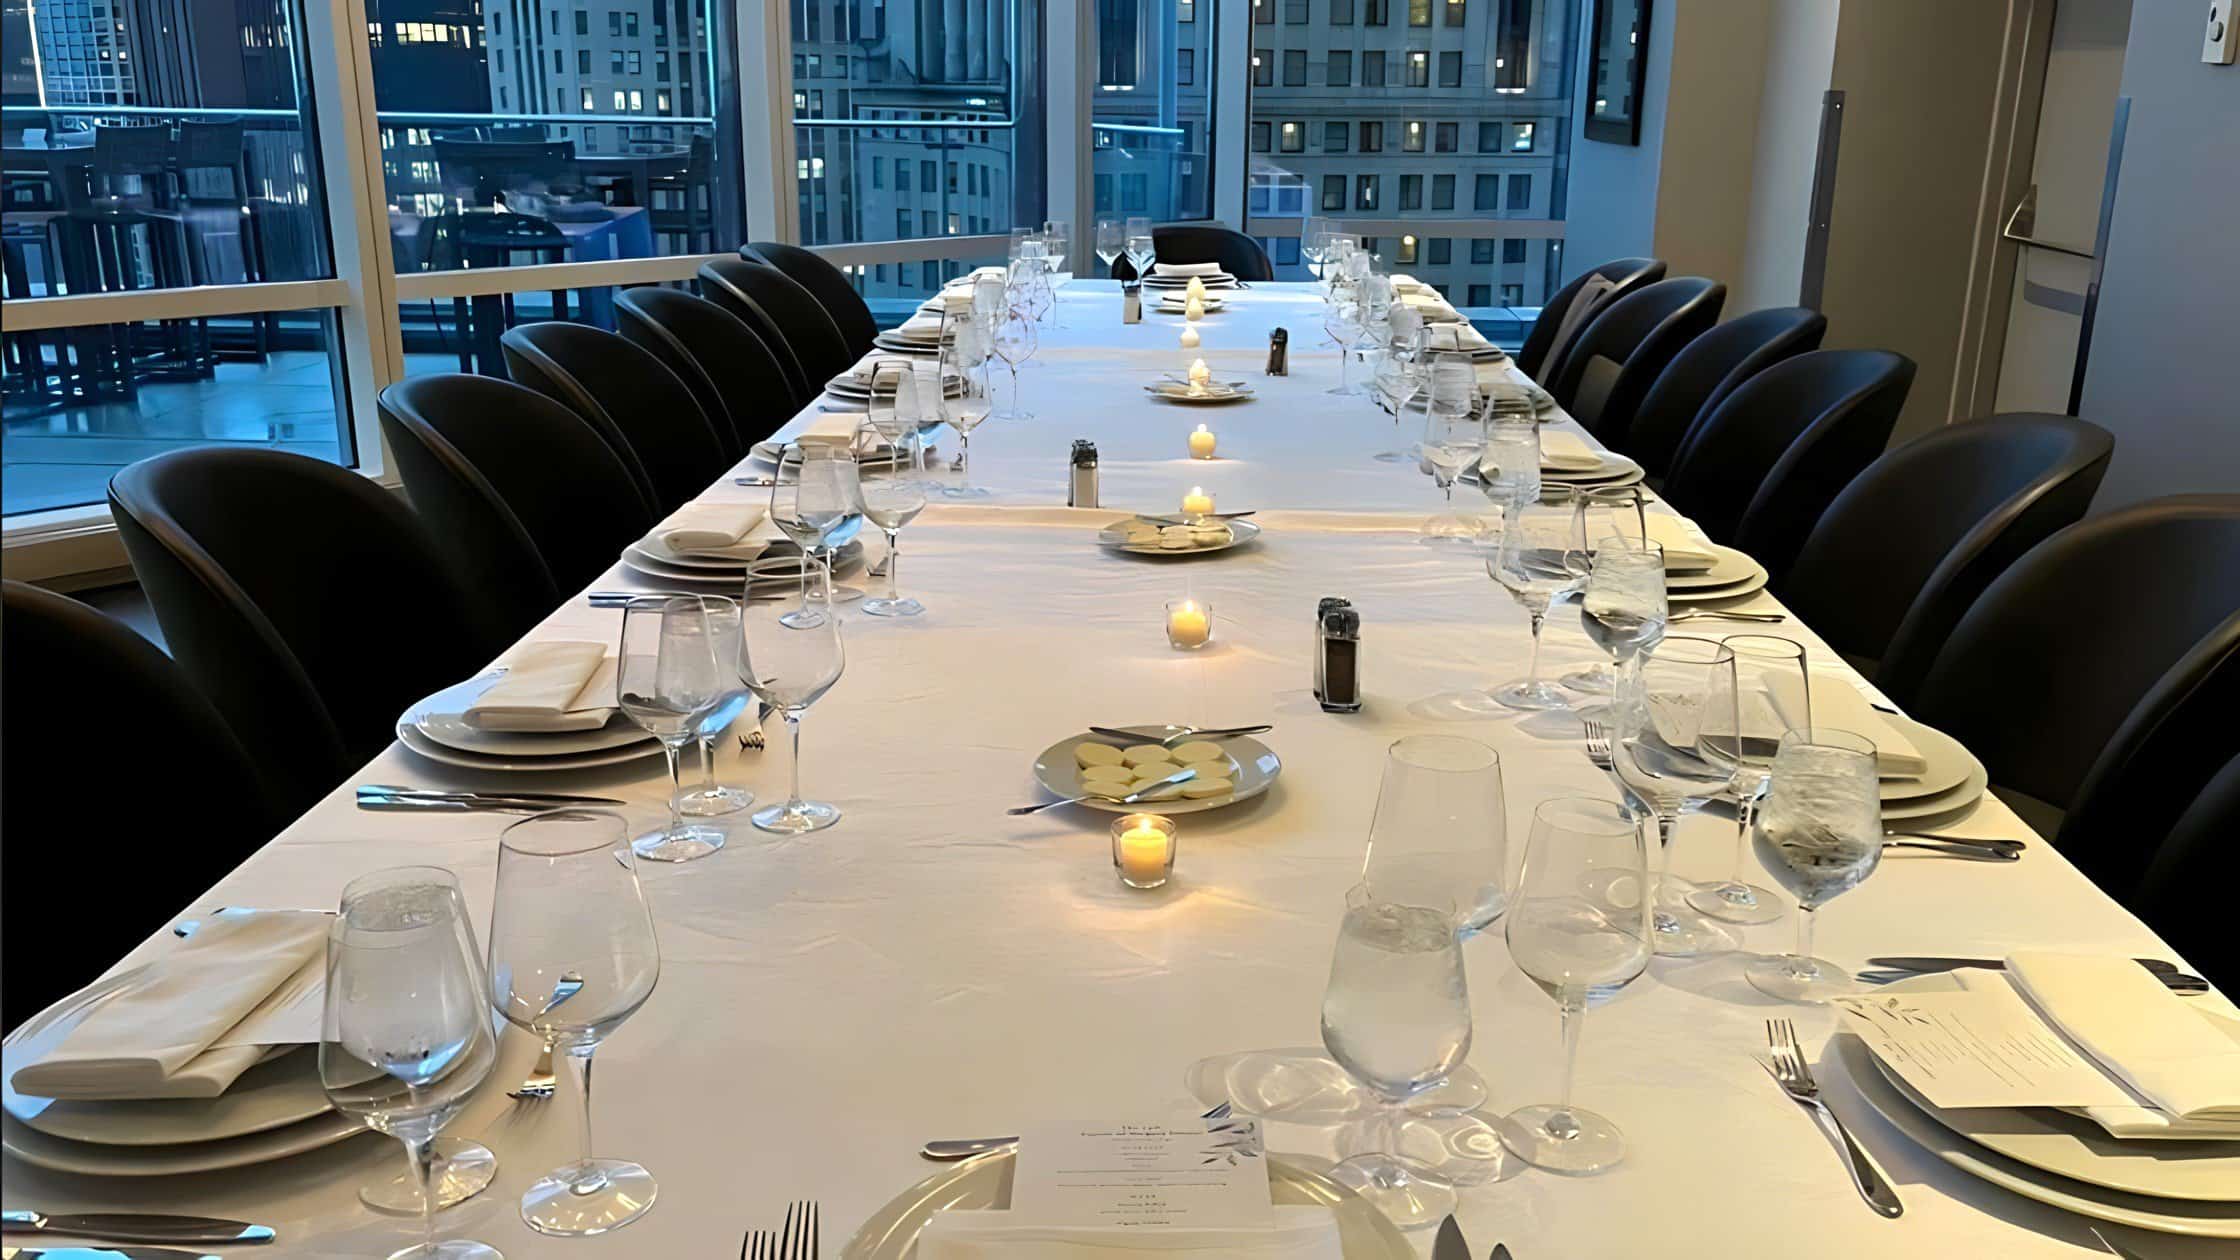 Future of Surgery Dinner table with skyscraper views